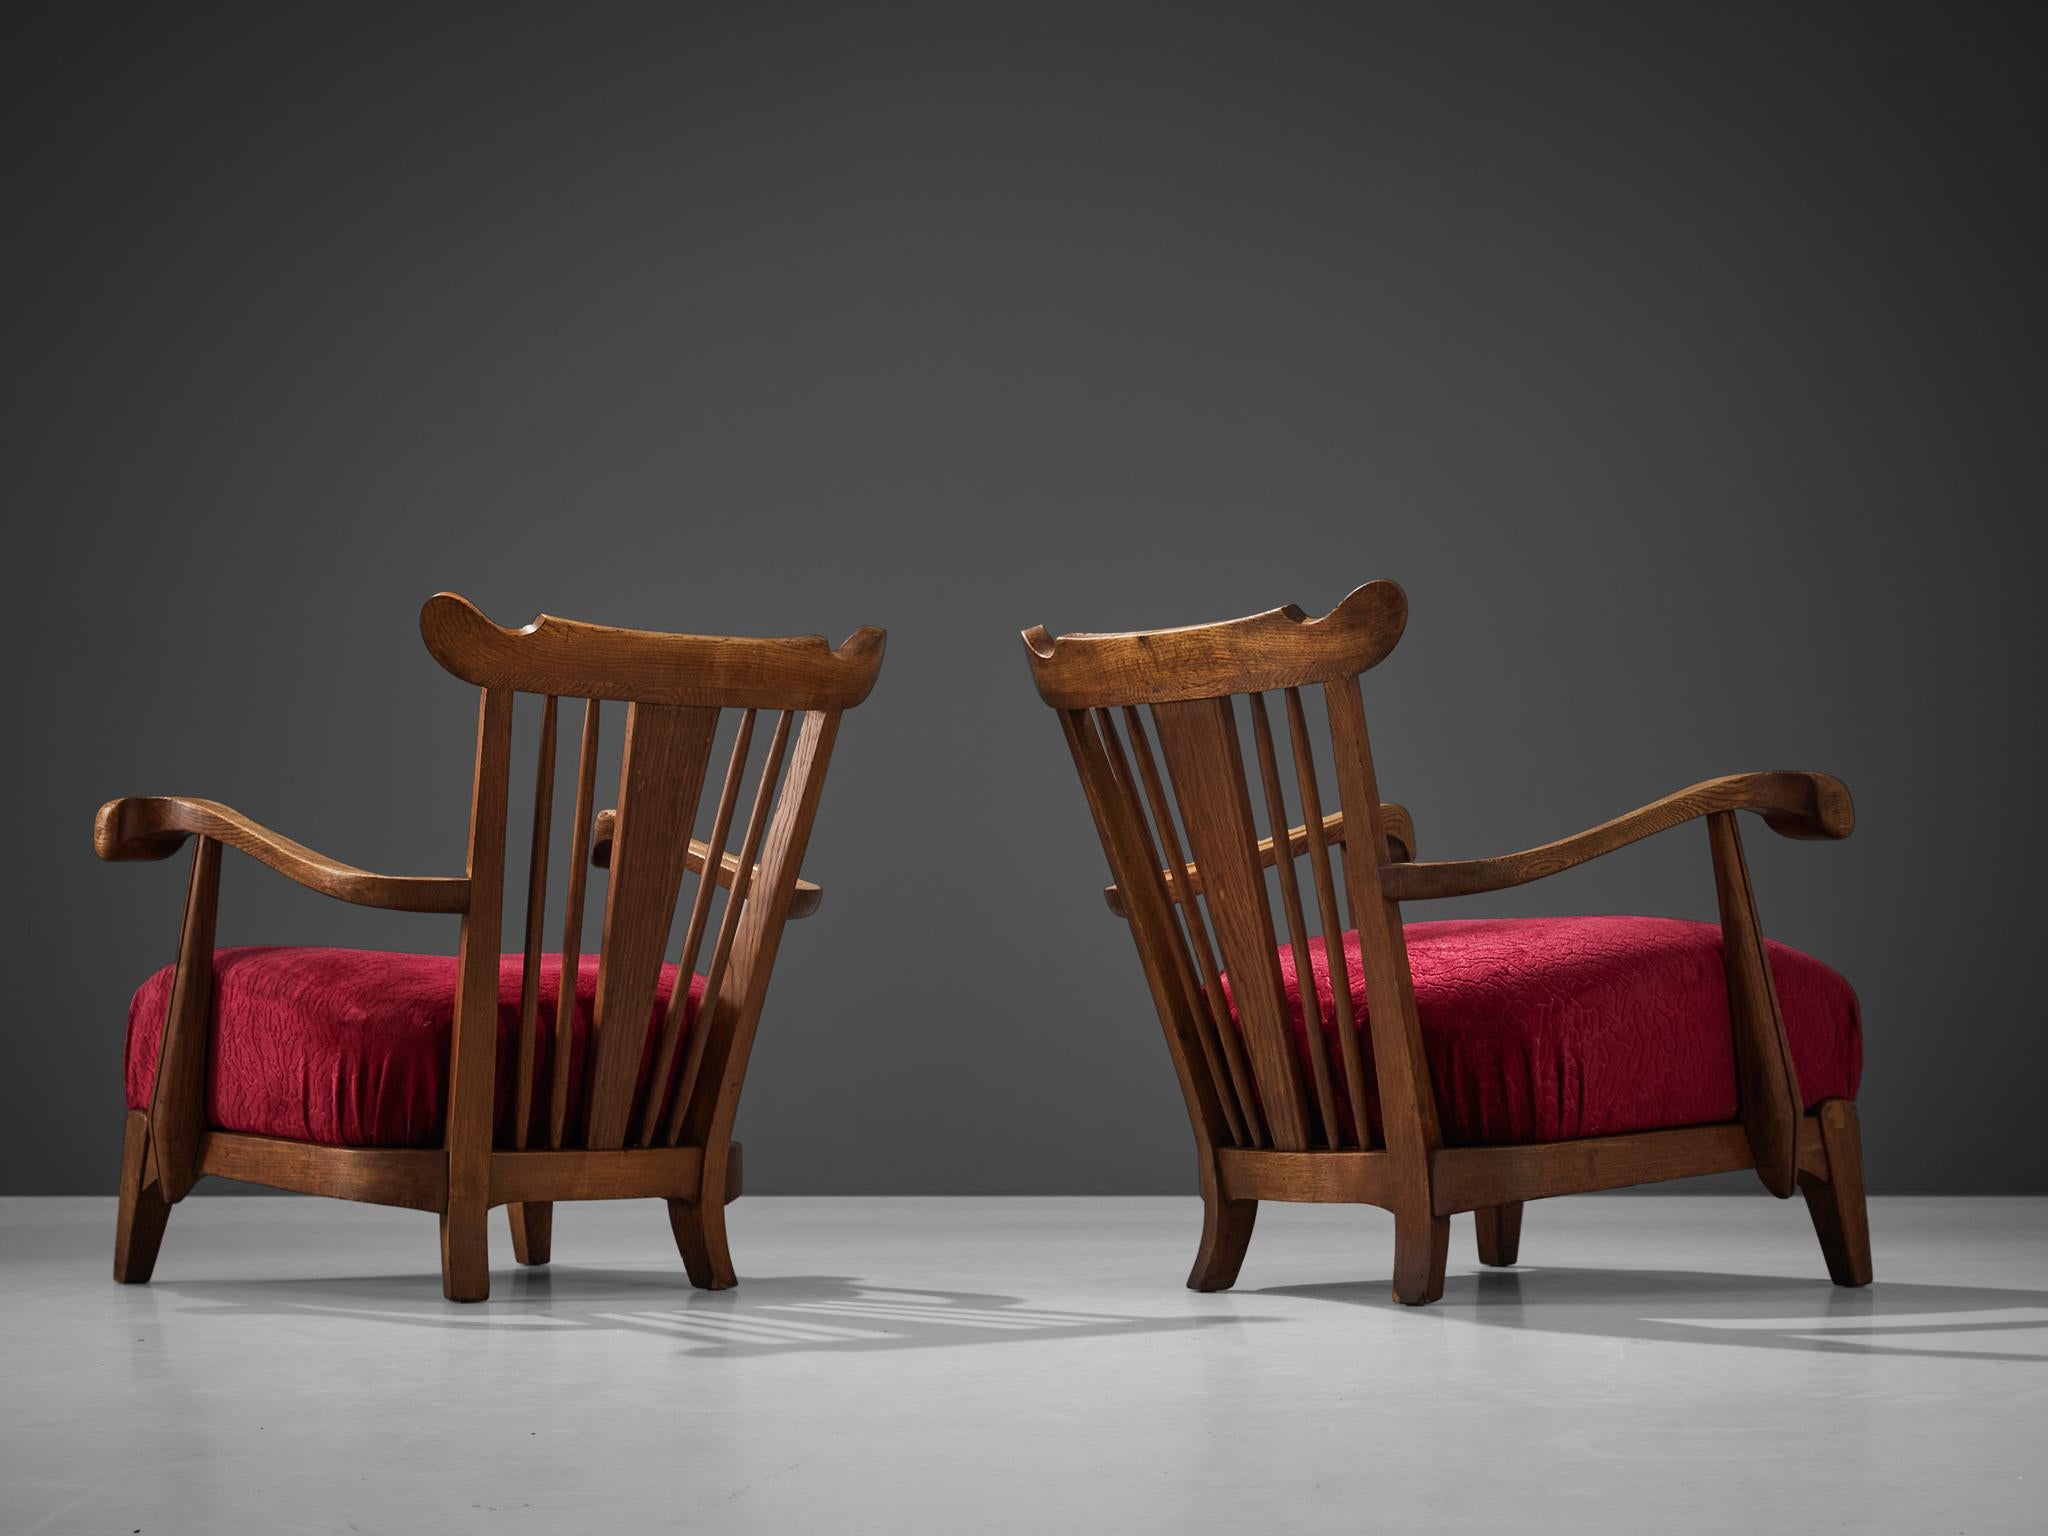 Pair of armchairs oak, velvet, France, 1950s.

These beautifully designed lounge chairs hold a striking construction by means of the sculpted elements discernible in the wooden frame. The armrests are characterized by curved, strong lines with